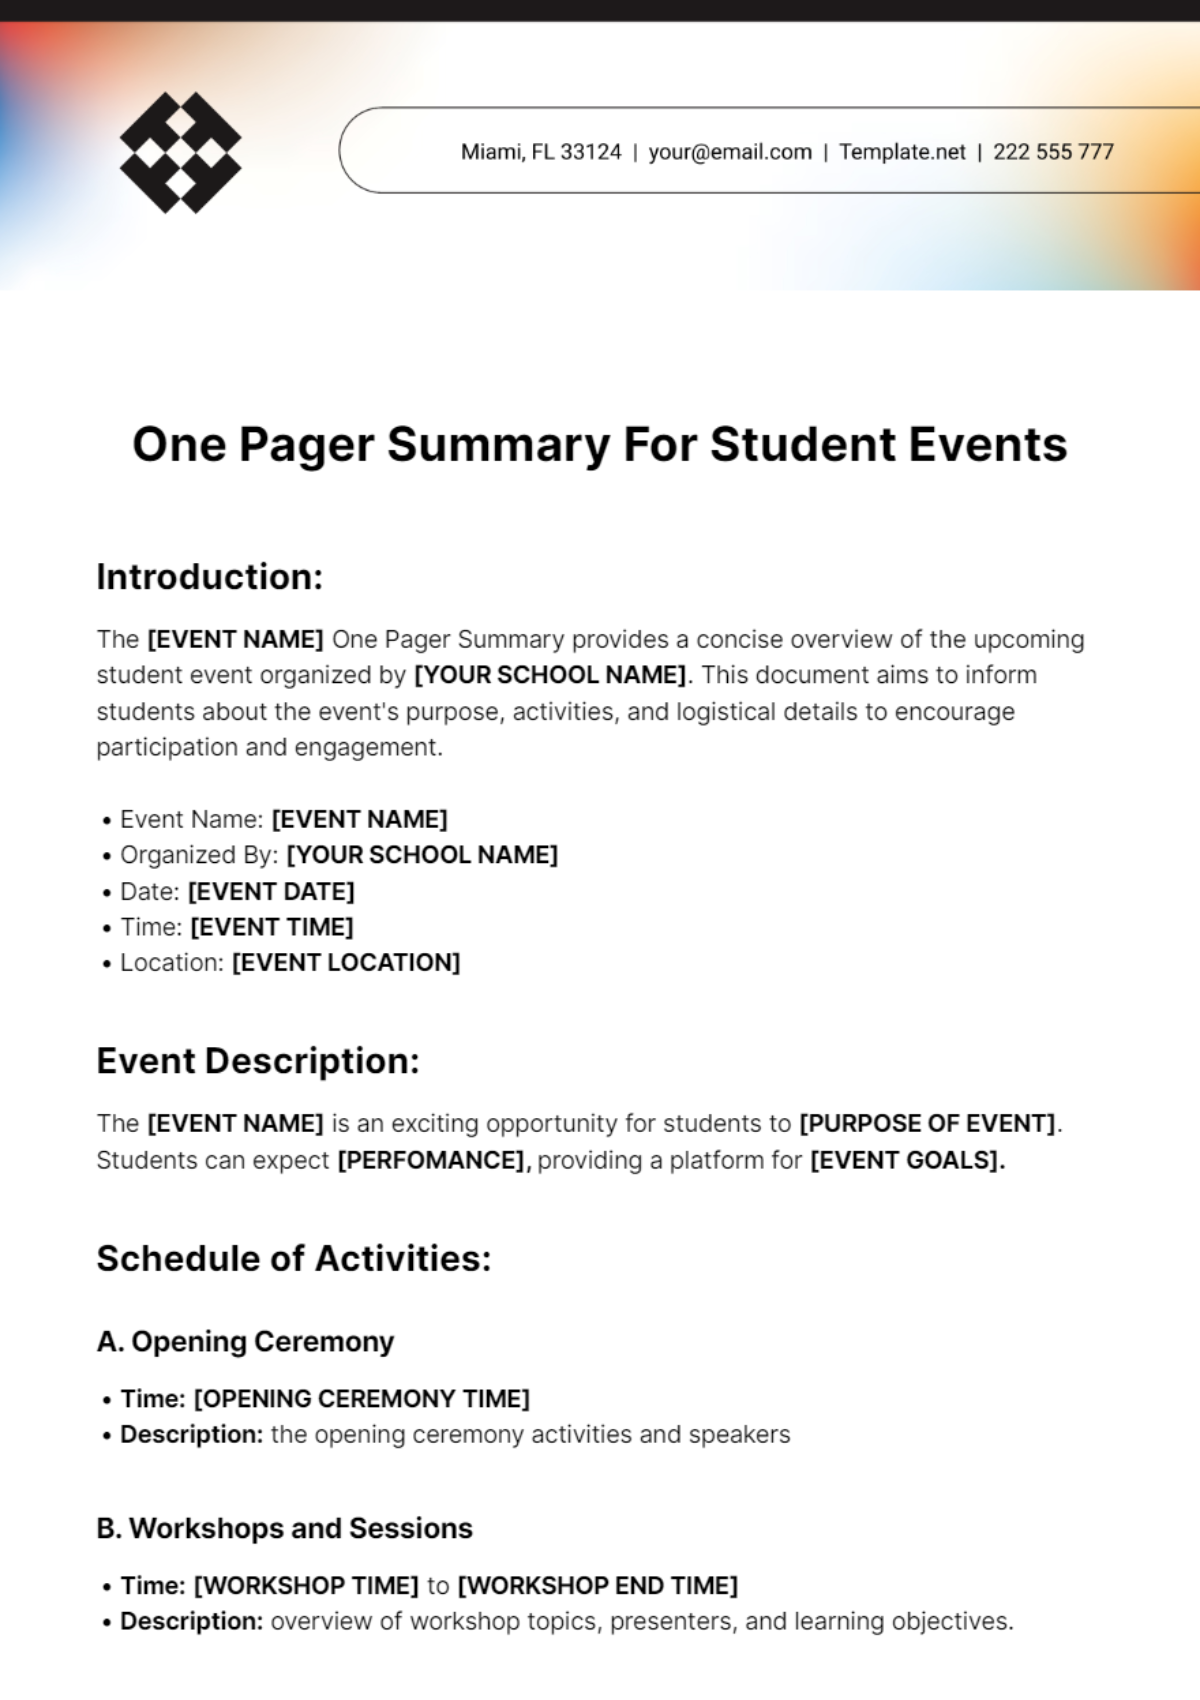 One Pager Summary For Student Events Template